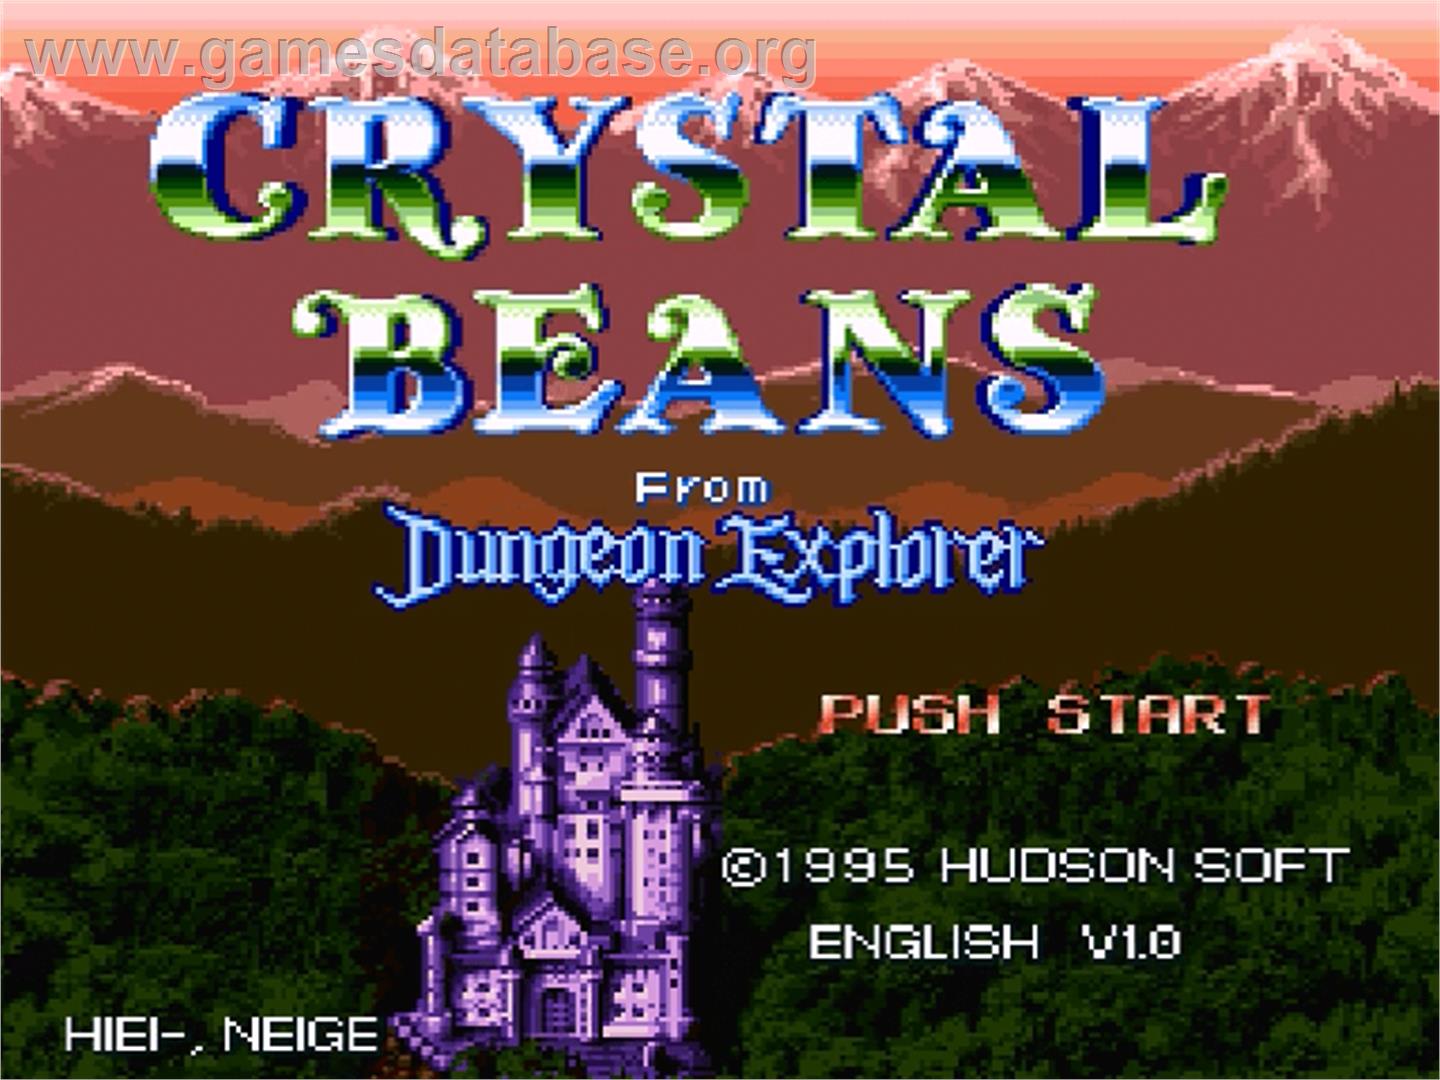 Crystal Beans From Dungeon Explorer - Nintendo SNES - Artwork - Title Screen